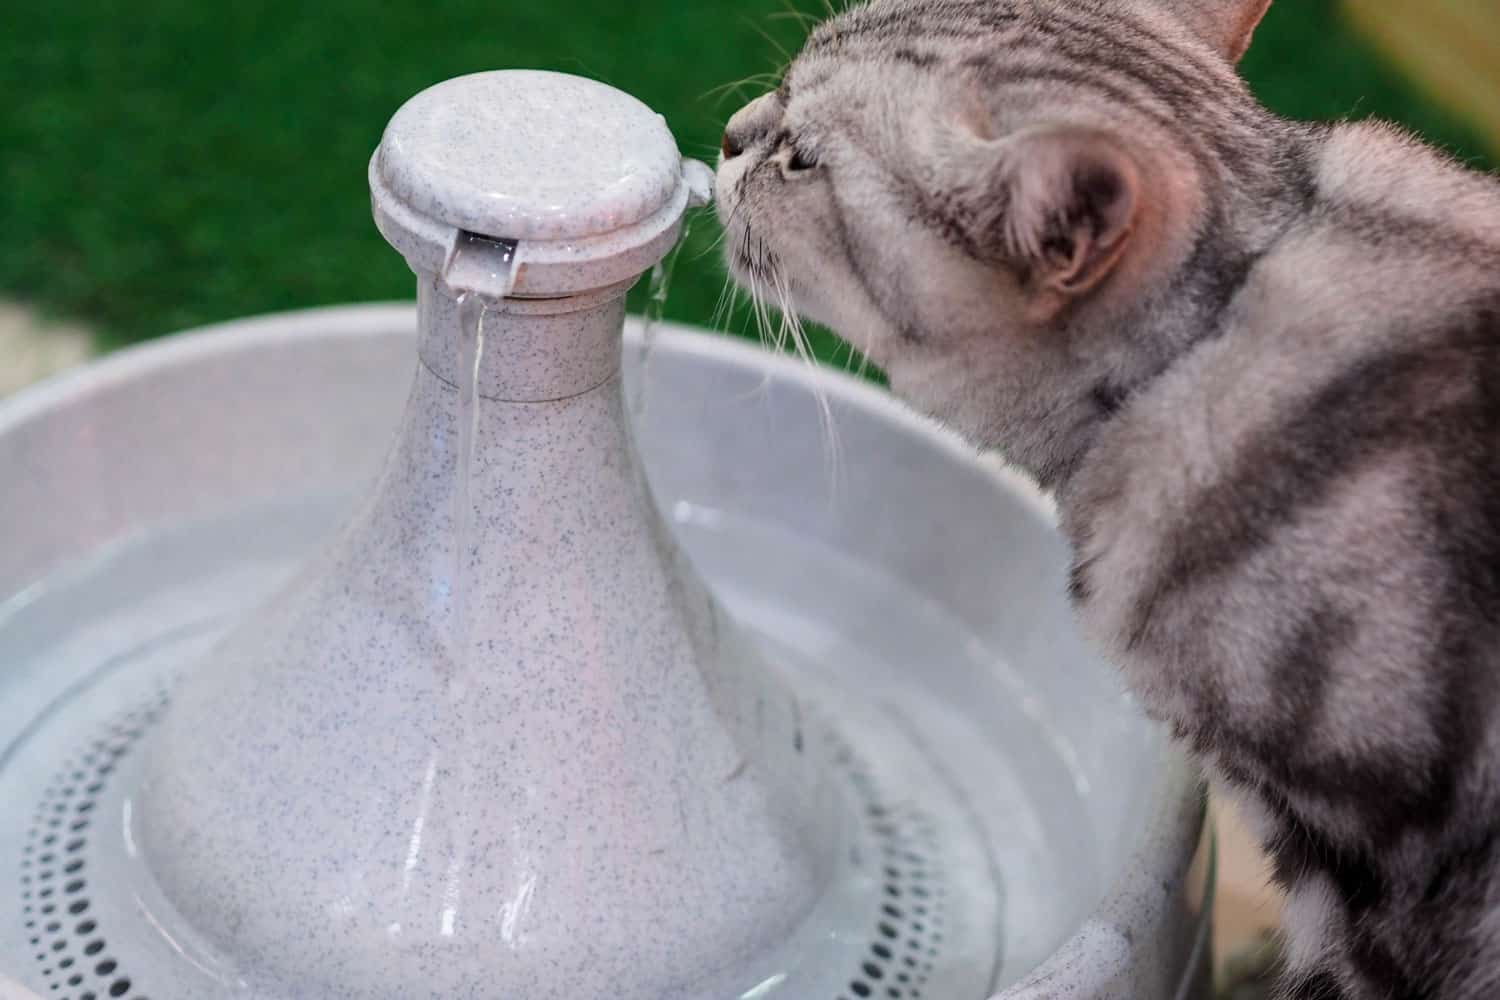 American short hair cat thirsty so drinking water from water fountain
